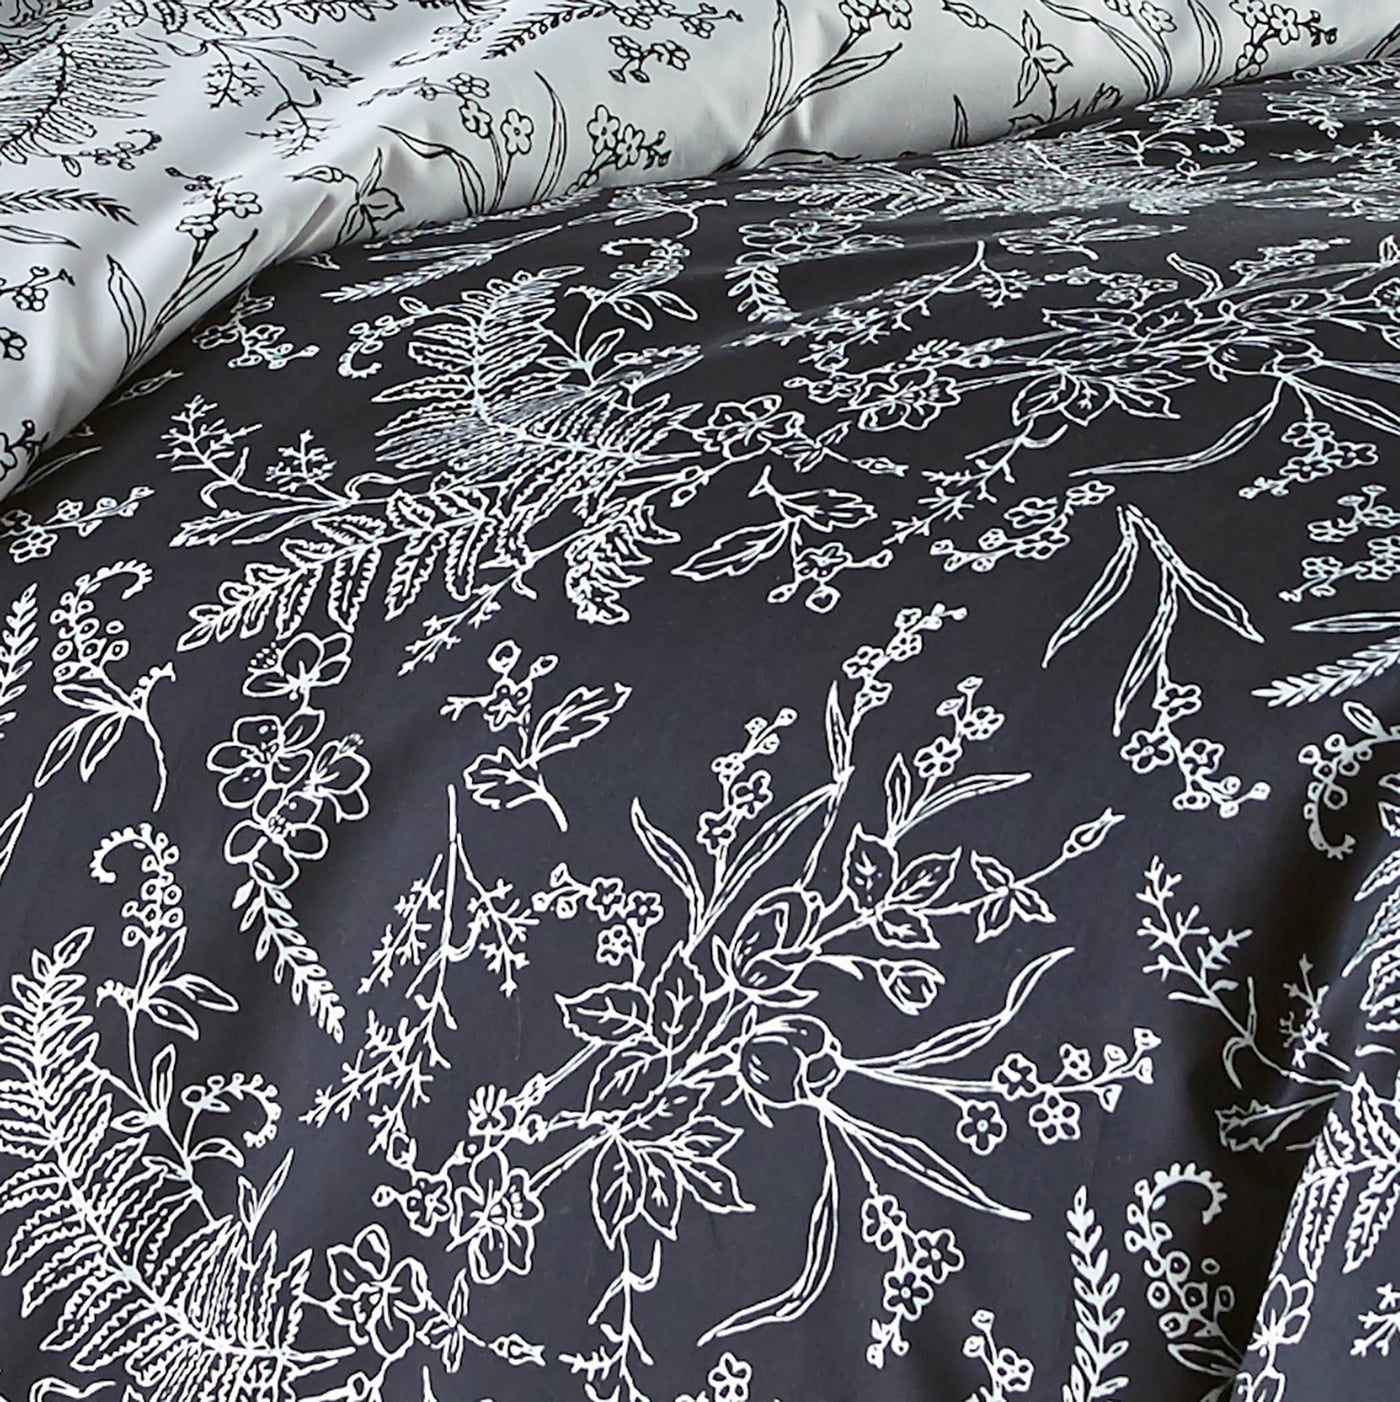 Details and Print Pattern of Wild Winter Reversible Comforter Set in Black#color_wild-winter-black-with-white-flowers